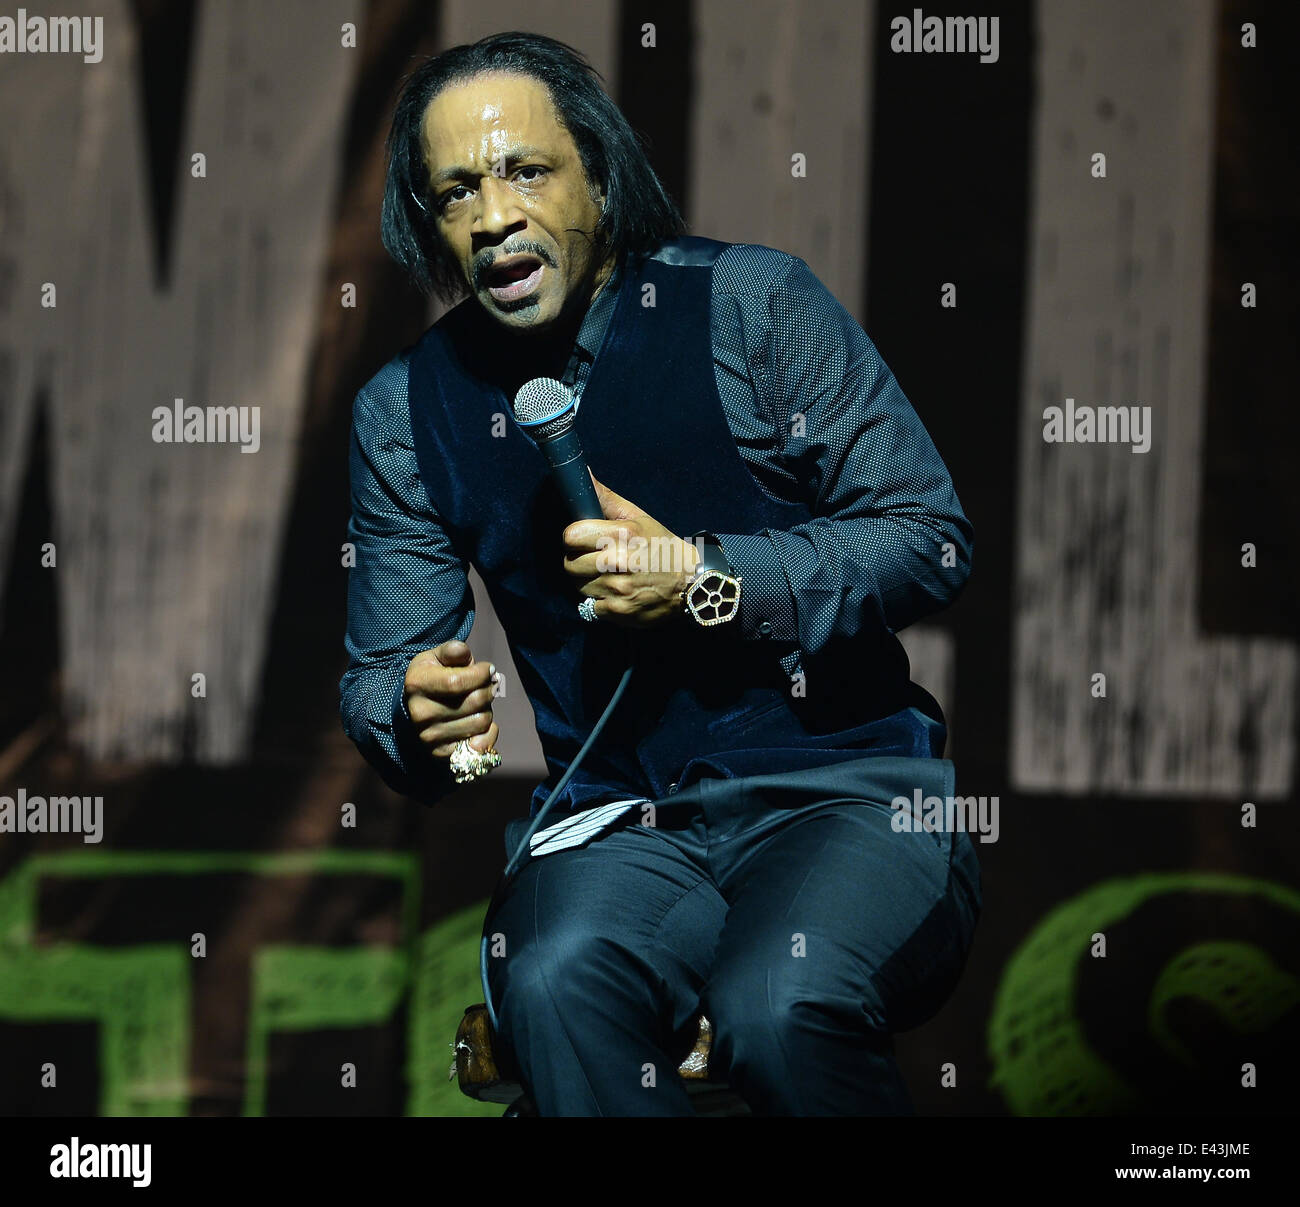 Katt Williams Growth Spurt comedy tour at the James L Knight Center  Featuring: Actor/comedian Katt Williams Where: Miami, Florida, United States When: 18 Jan 2014 Stock Photo